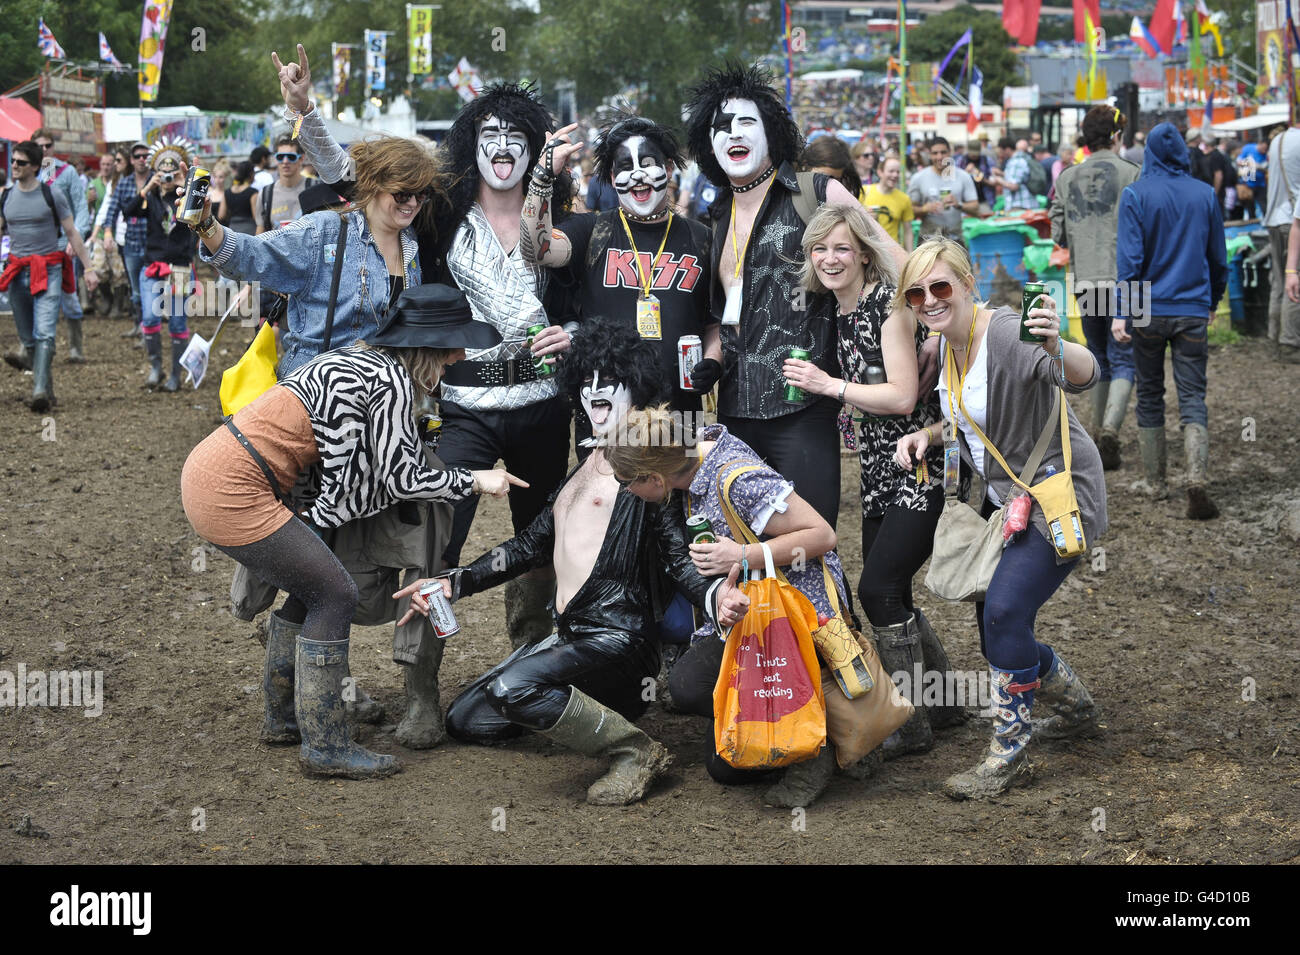 Revellers dress up as the band Kiss and attract their very own groupies at Glastonbury festival at Worthy Farm, Pilton. Stock Photo